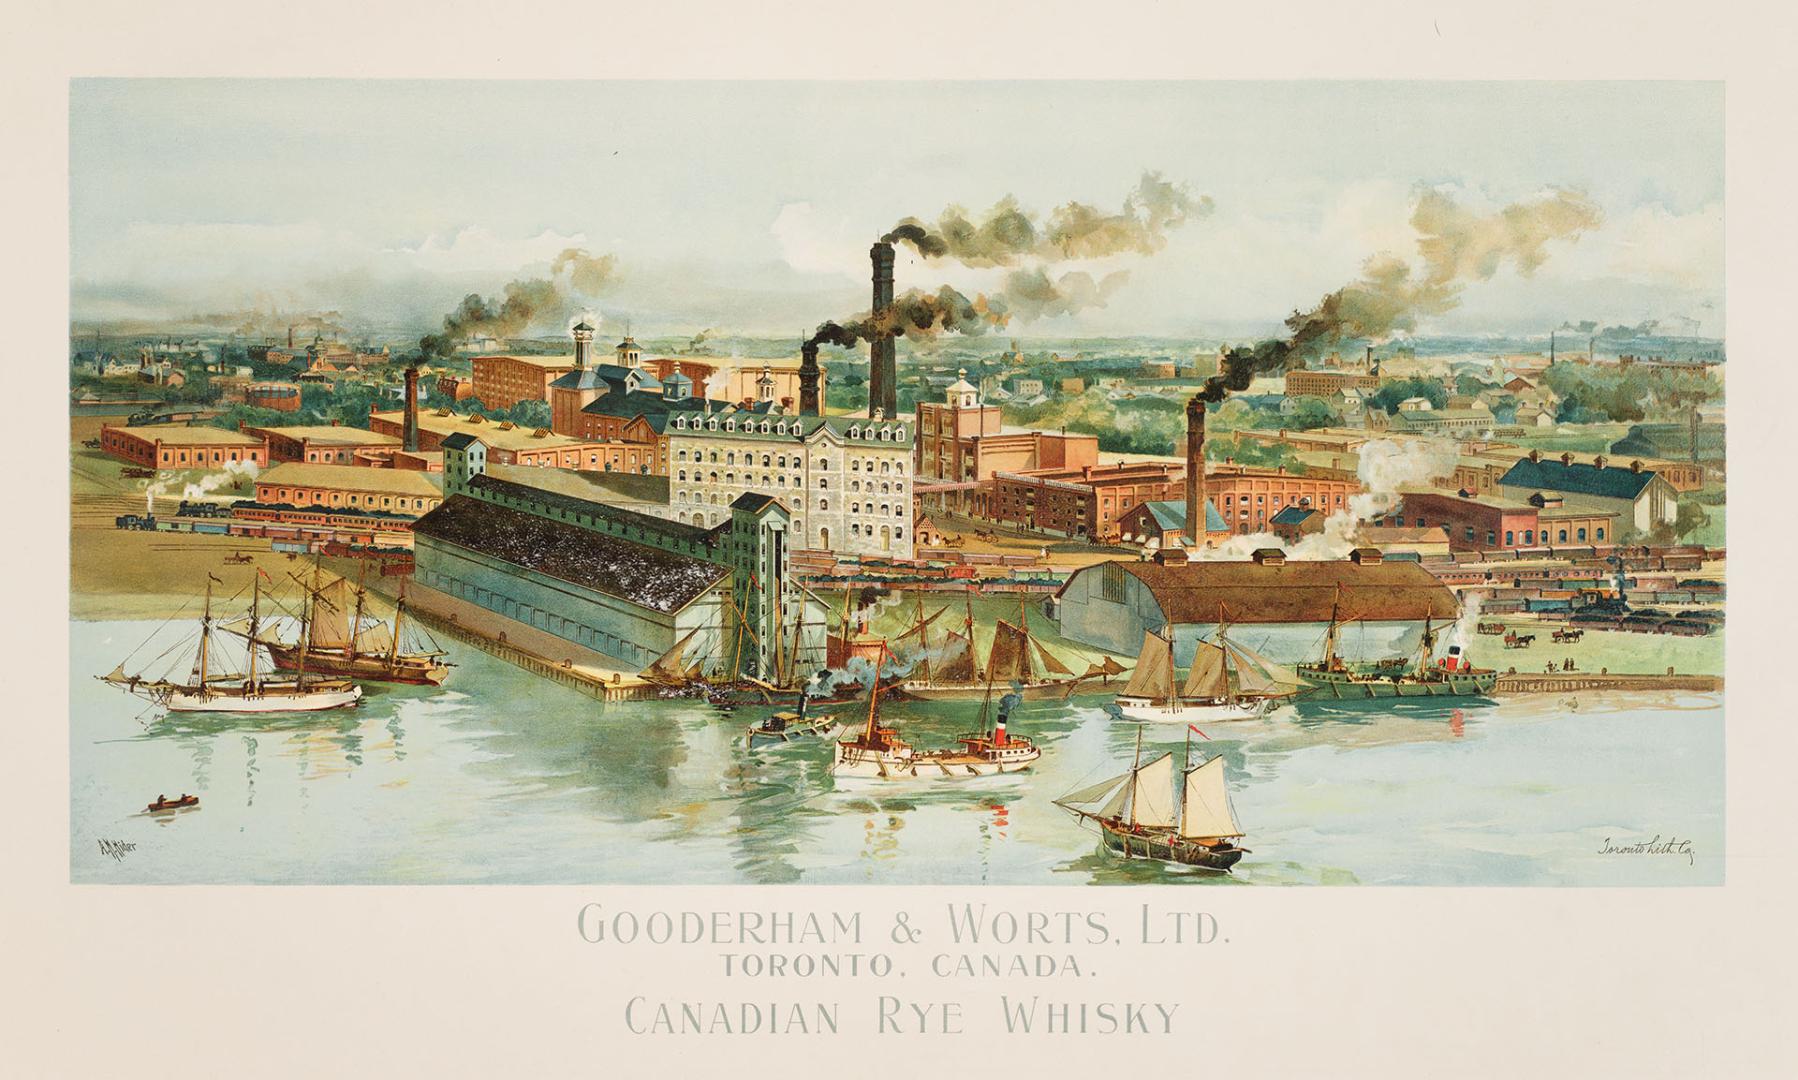 Image shows a factory with a number of chimneys by the lake.